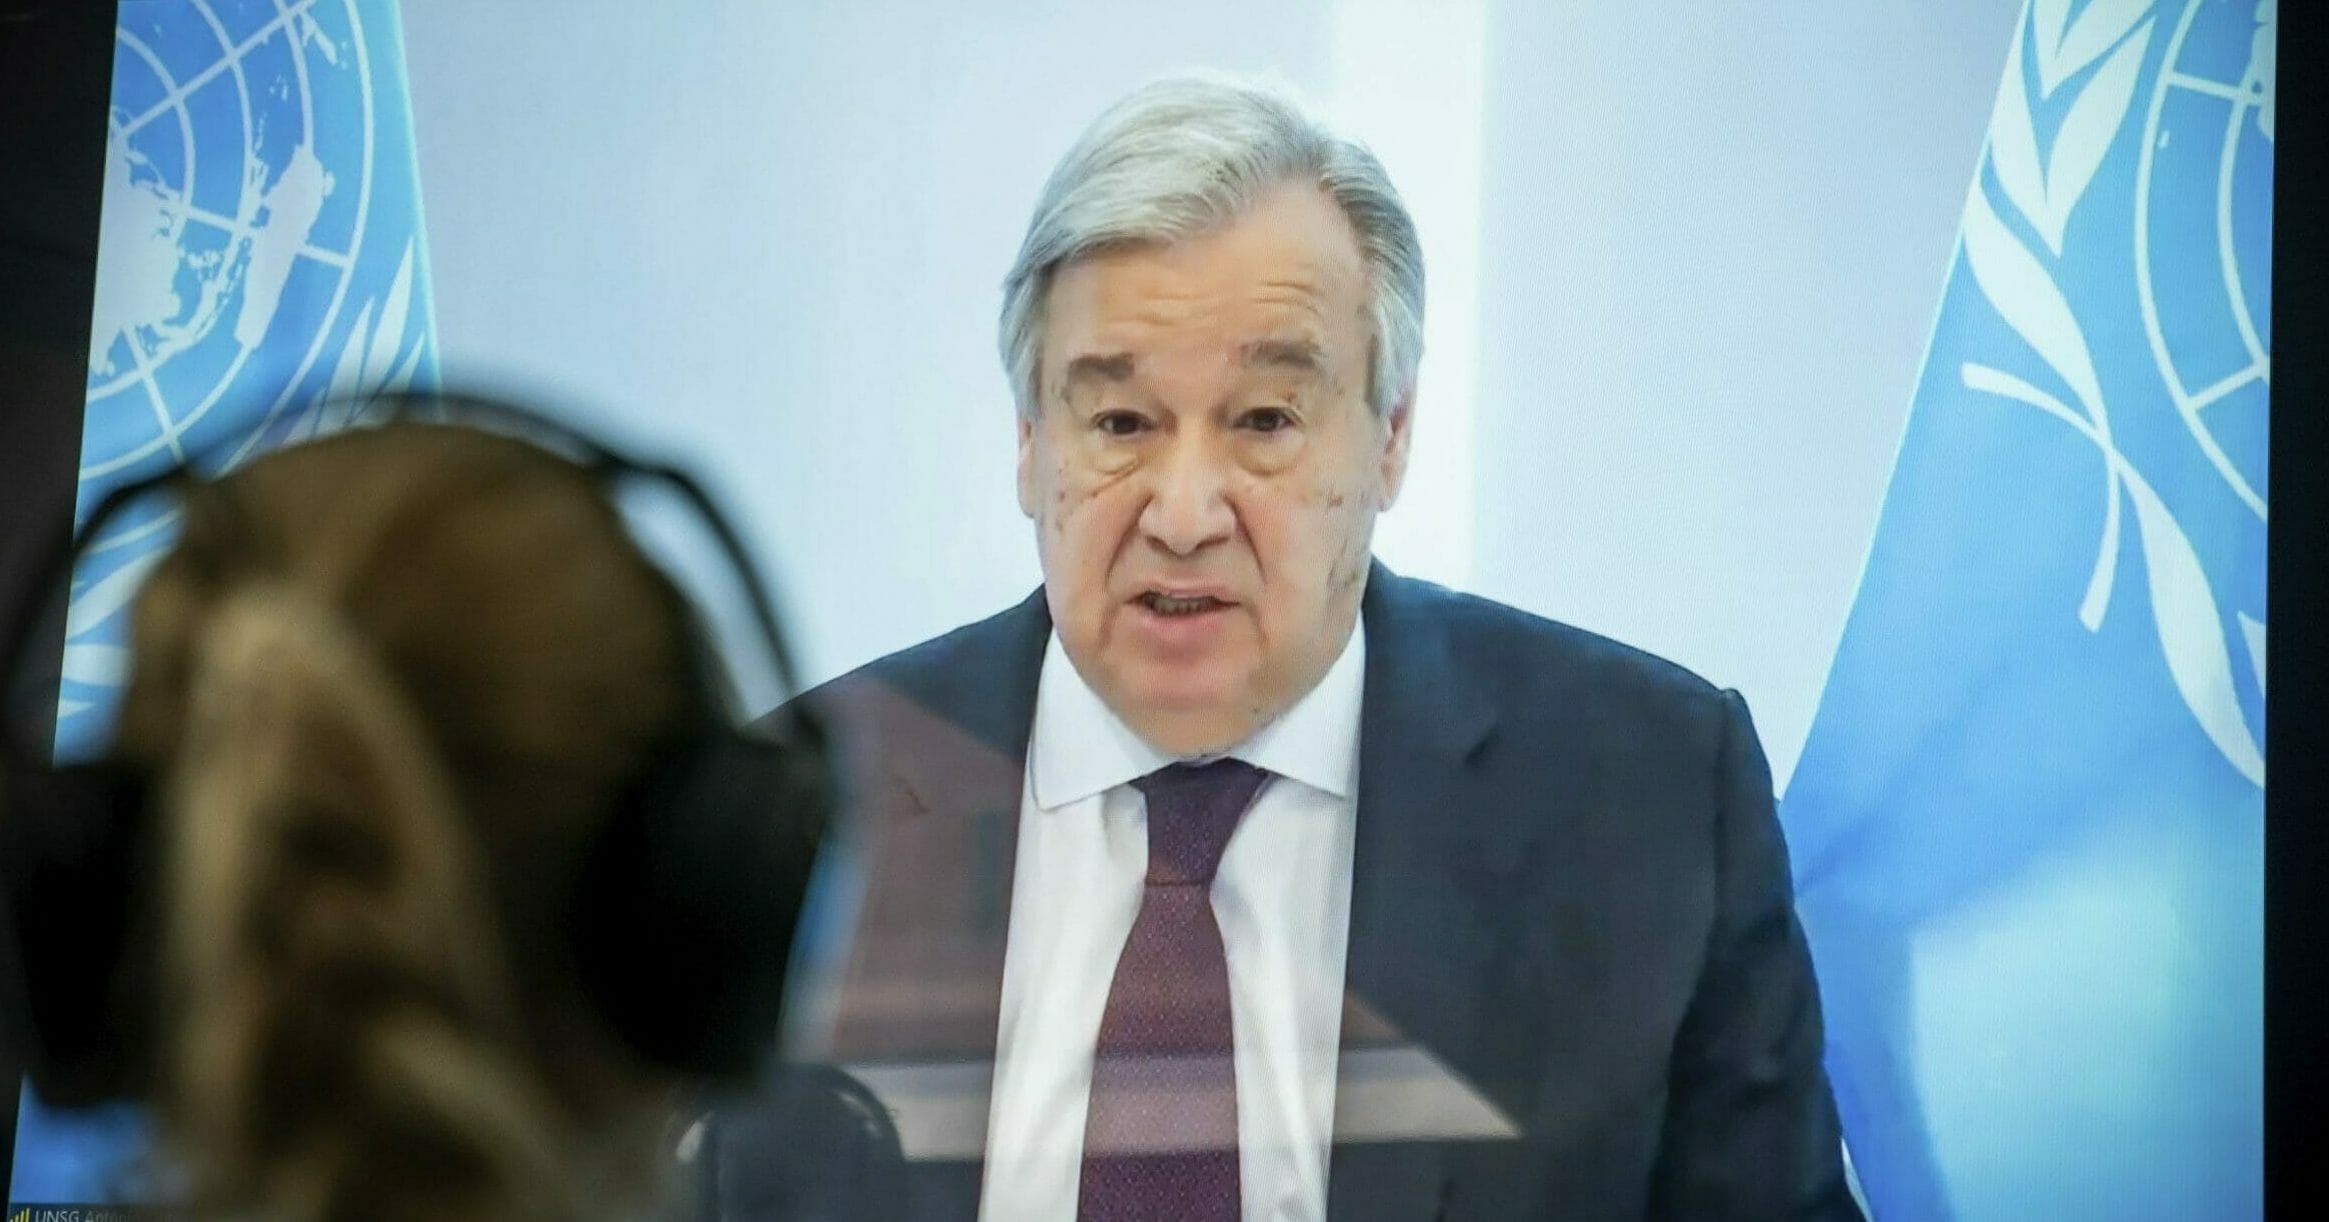 U.N. Secretary-General Antonio Guterres is displayed on a screen as he delivers a speech at the Petersberg Climate Dialogue in Berlin on April 28, 2020.